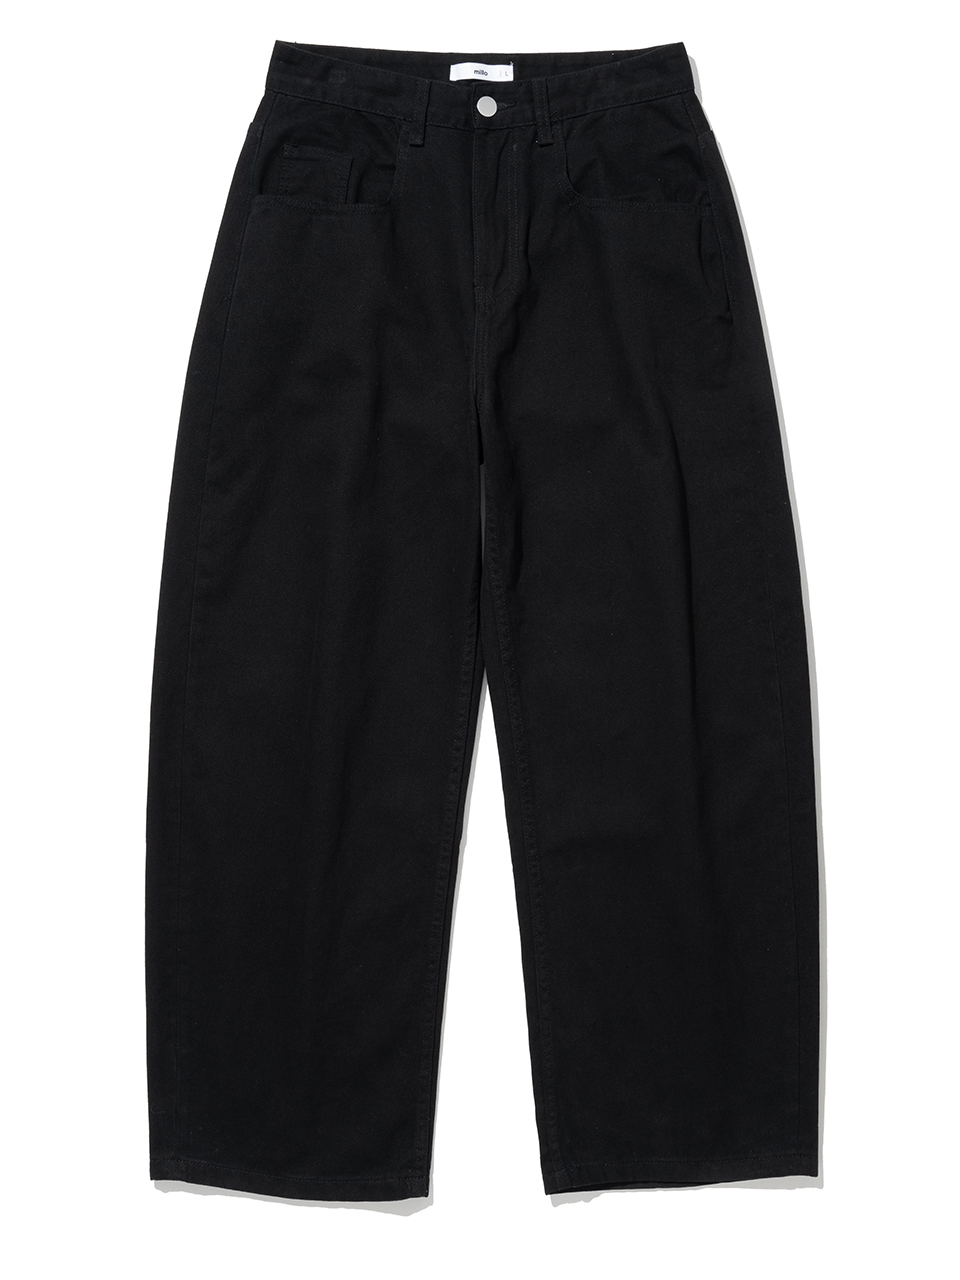 Reflect Curved Pants - Black